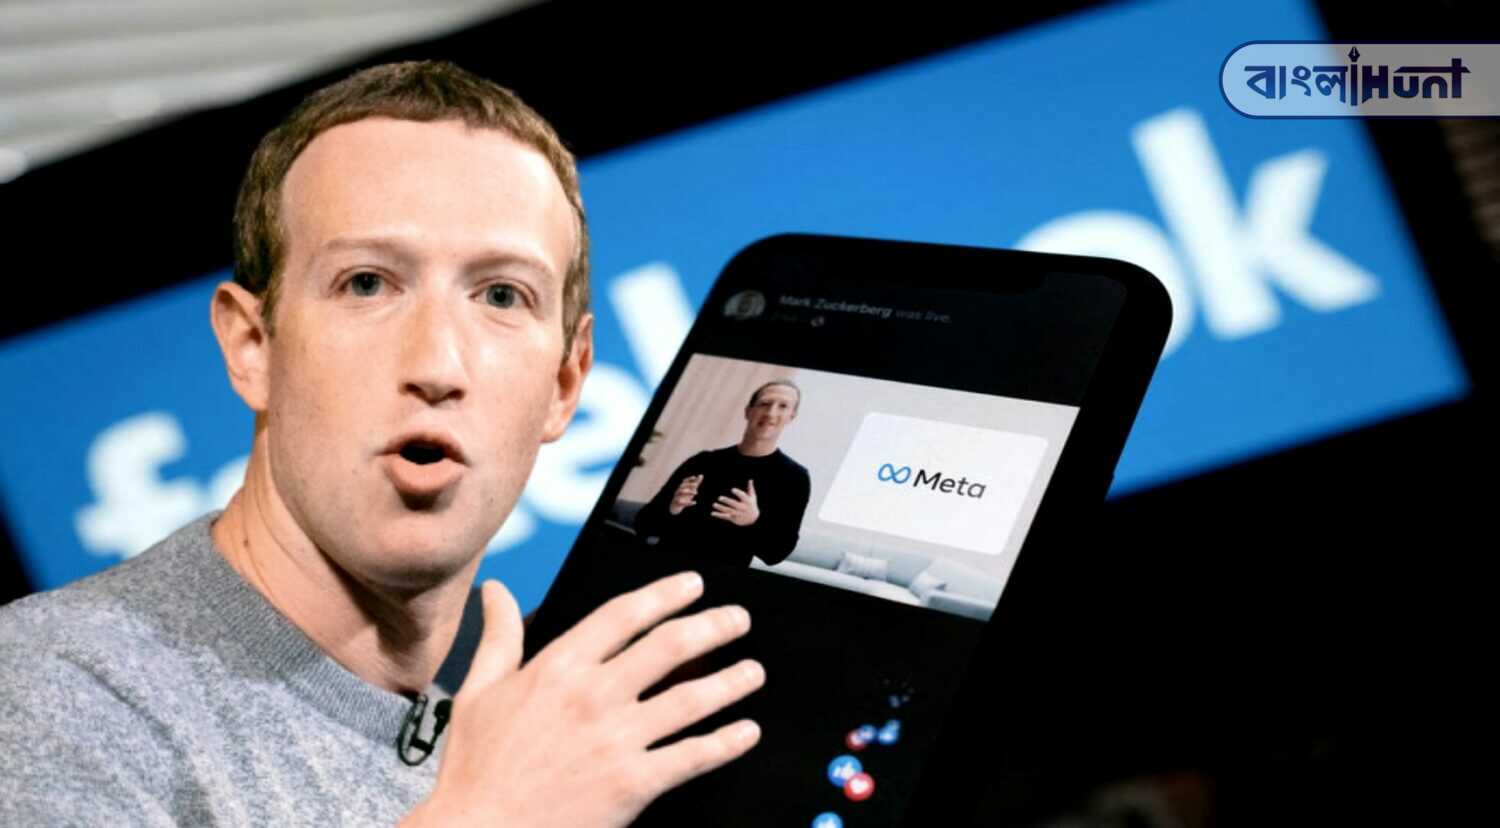 The name of Facebook has been changed to Meta: Mark Zuckerberg